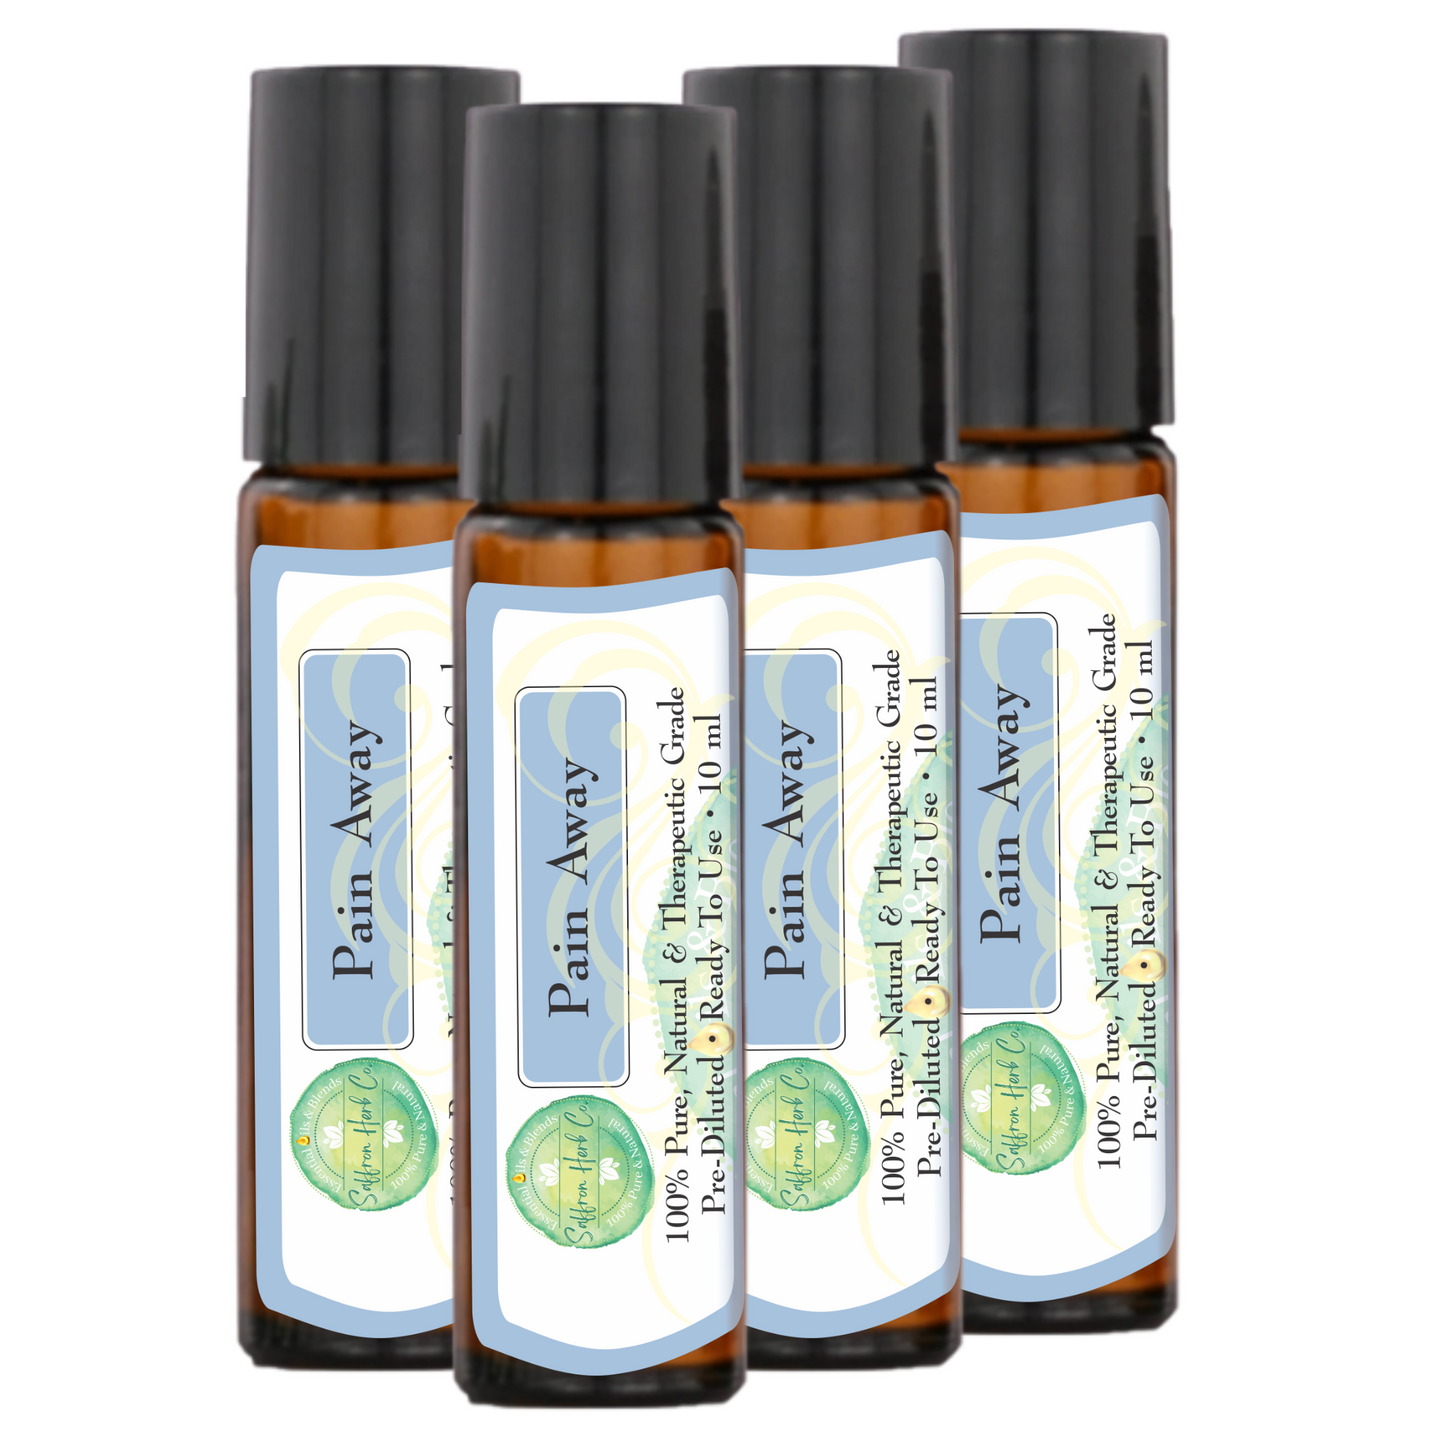 Pain Away™ Essential Oil Roller Bottle Blend • 100% Pure & Natural • Pre-Diluted • Ready To Use